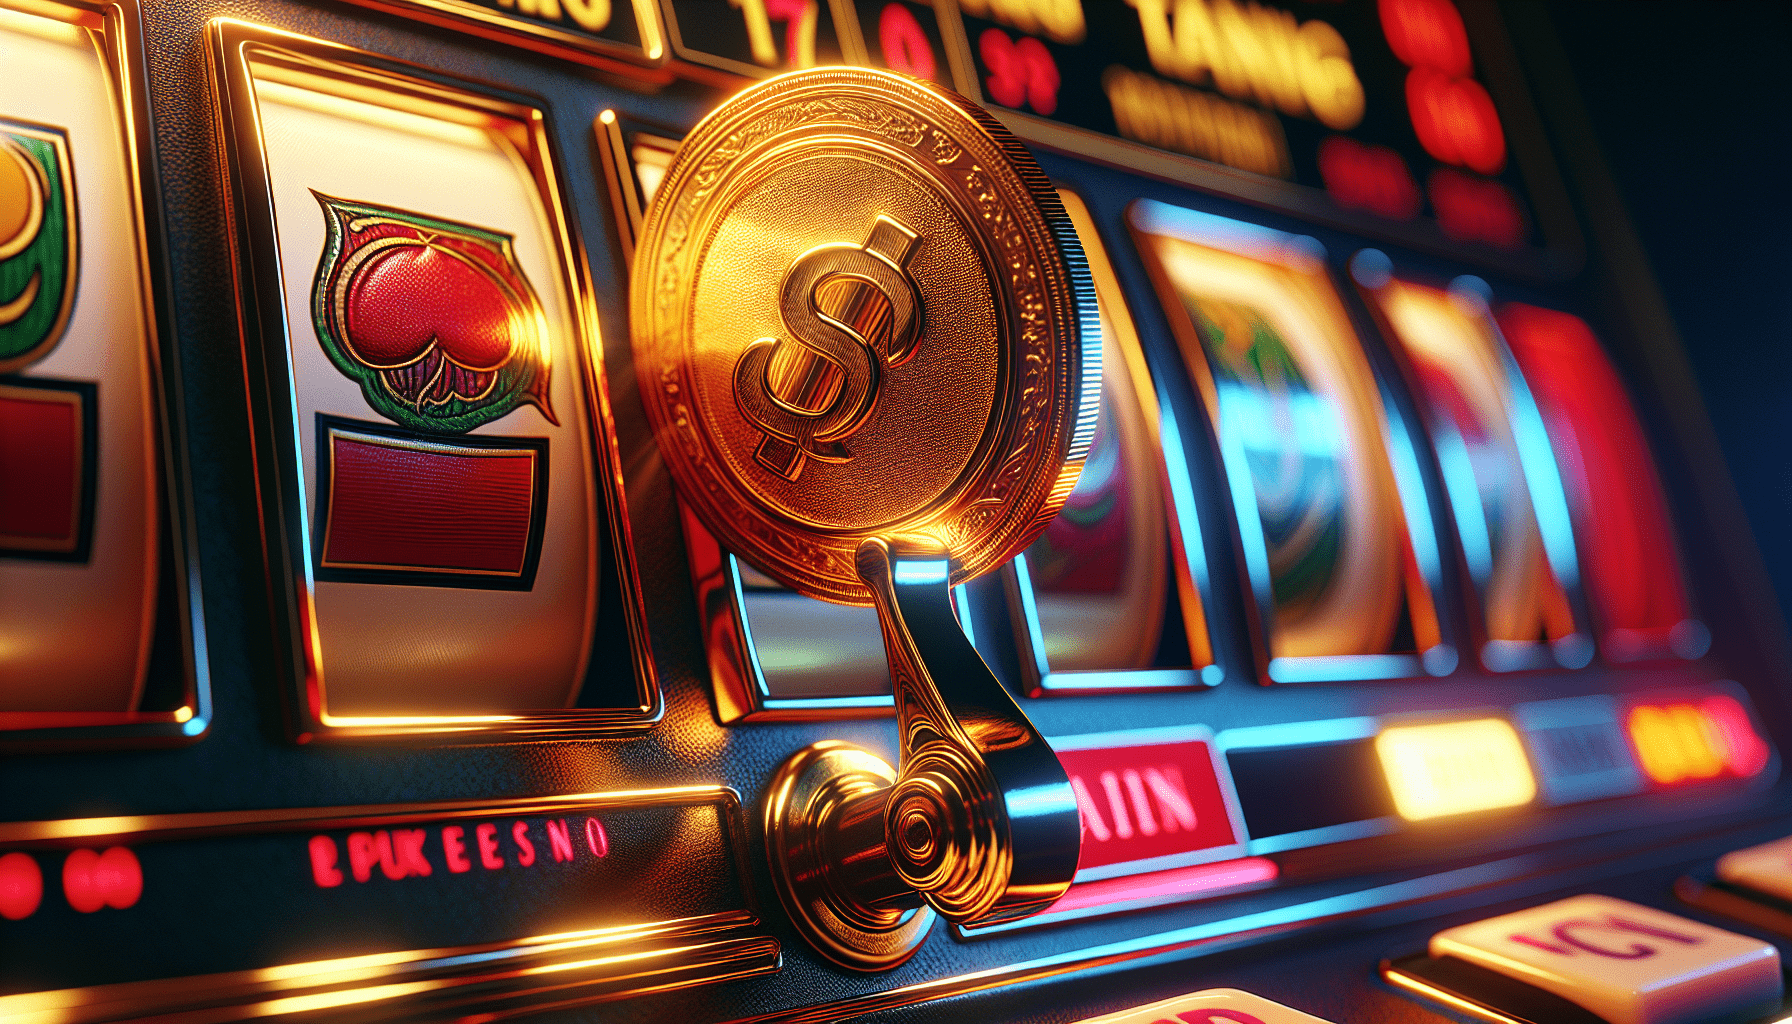 What Is The Best Online Slot Machine To Win Money?